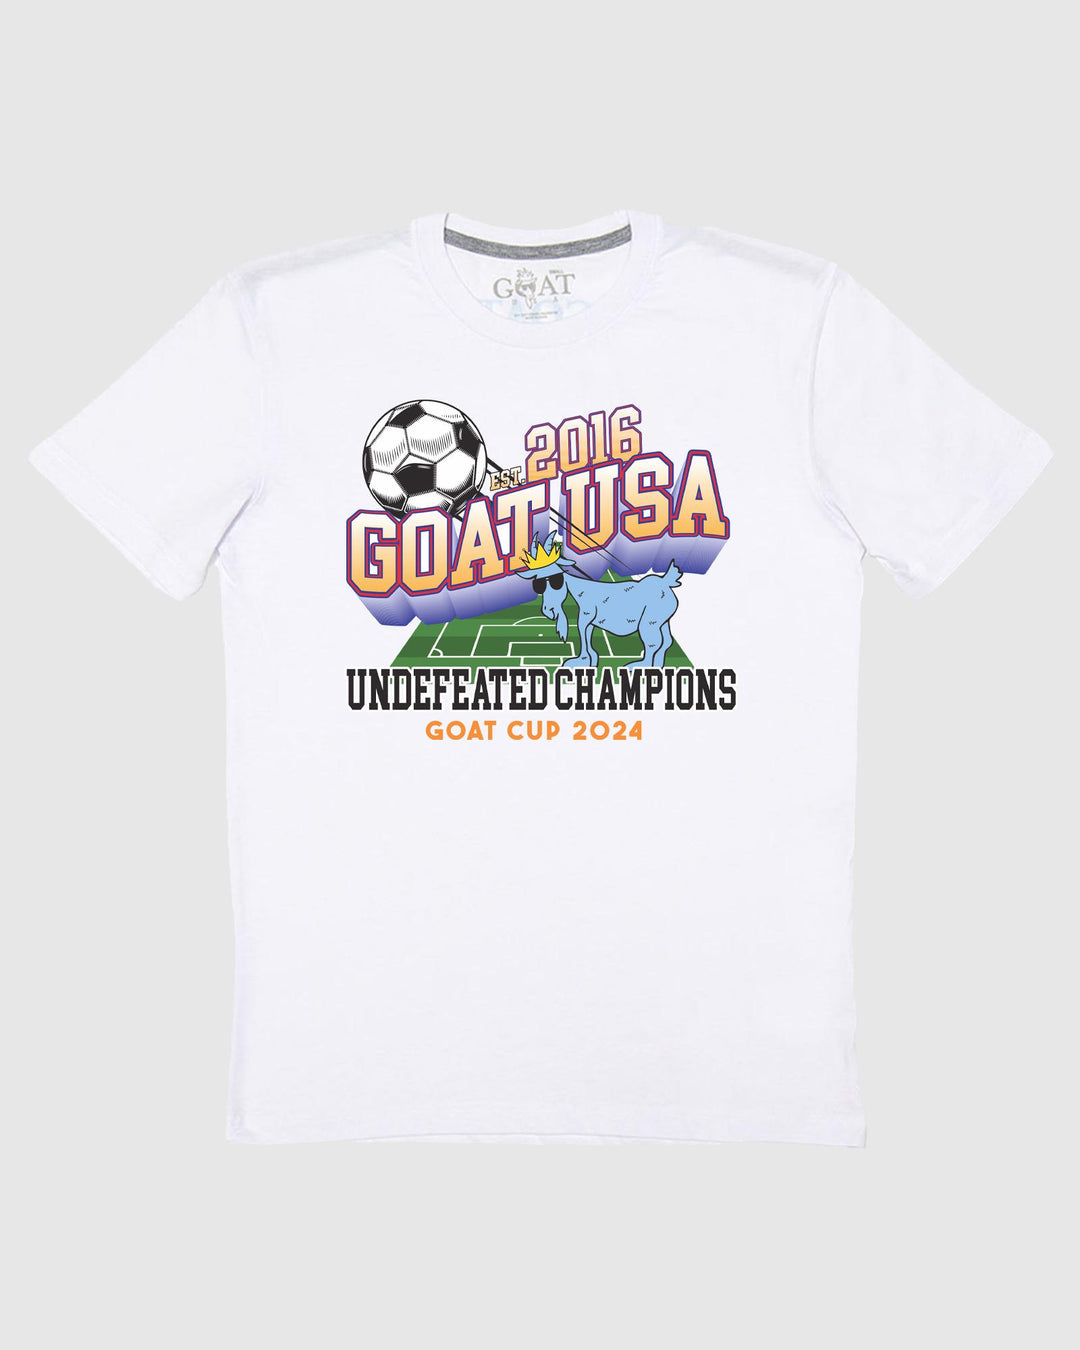 Front of white t-shirt that reads 'Undefeated Champions' with soccer design